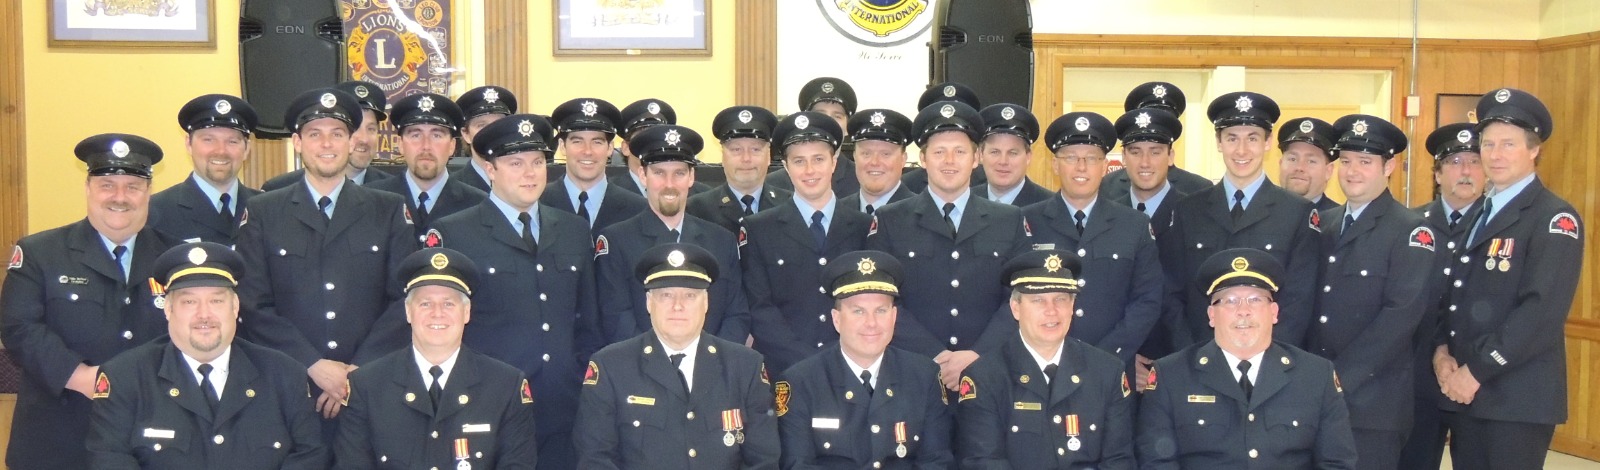 group of firefighters in uniform